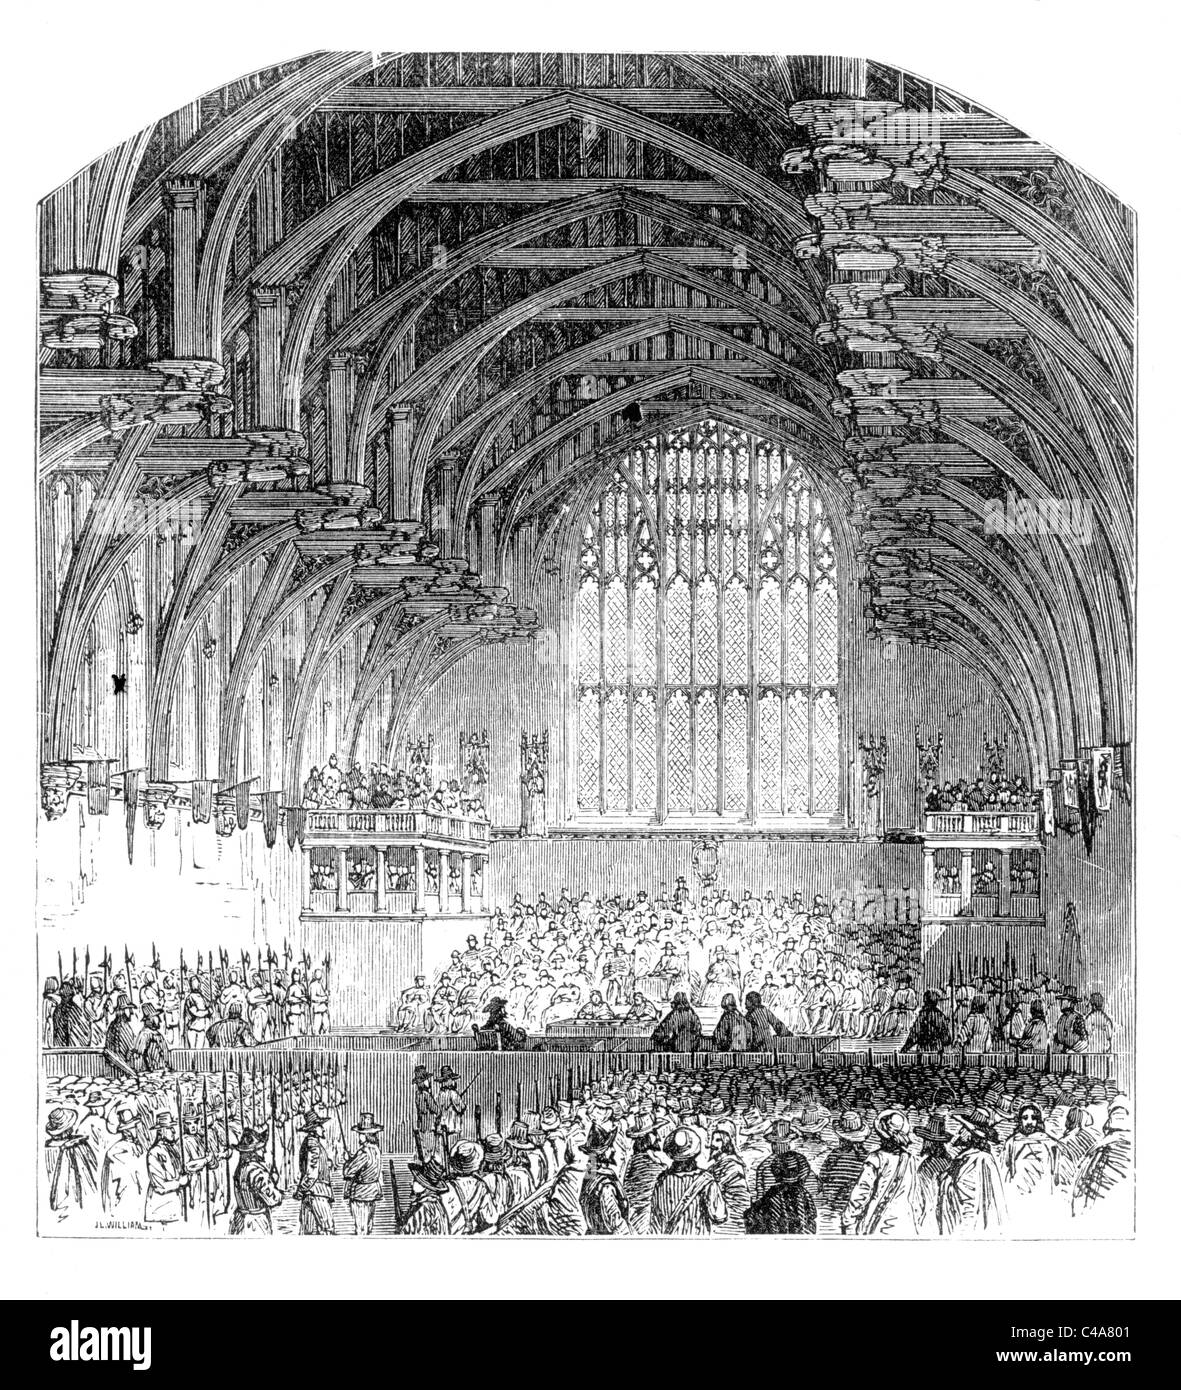 The trial of King Charles I in Westminster Hall, london, 1649; Black and White Illustration; Stock Photo